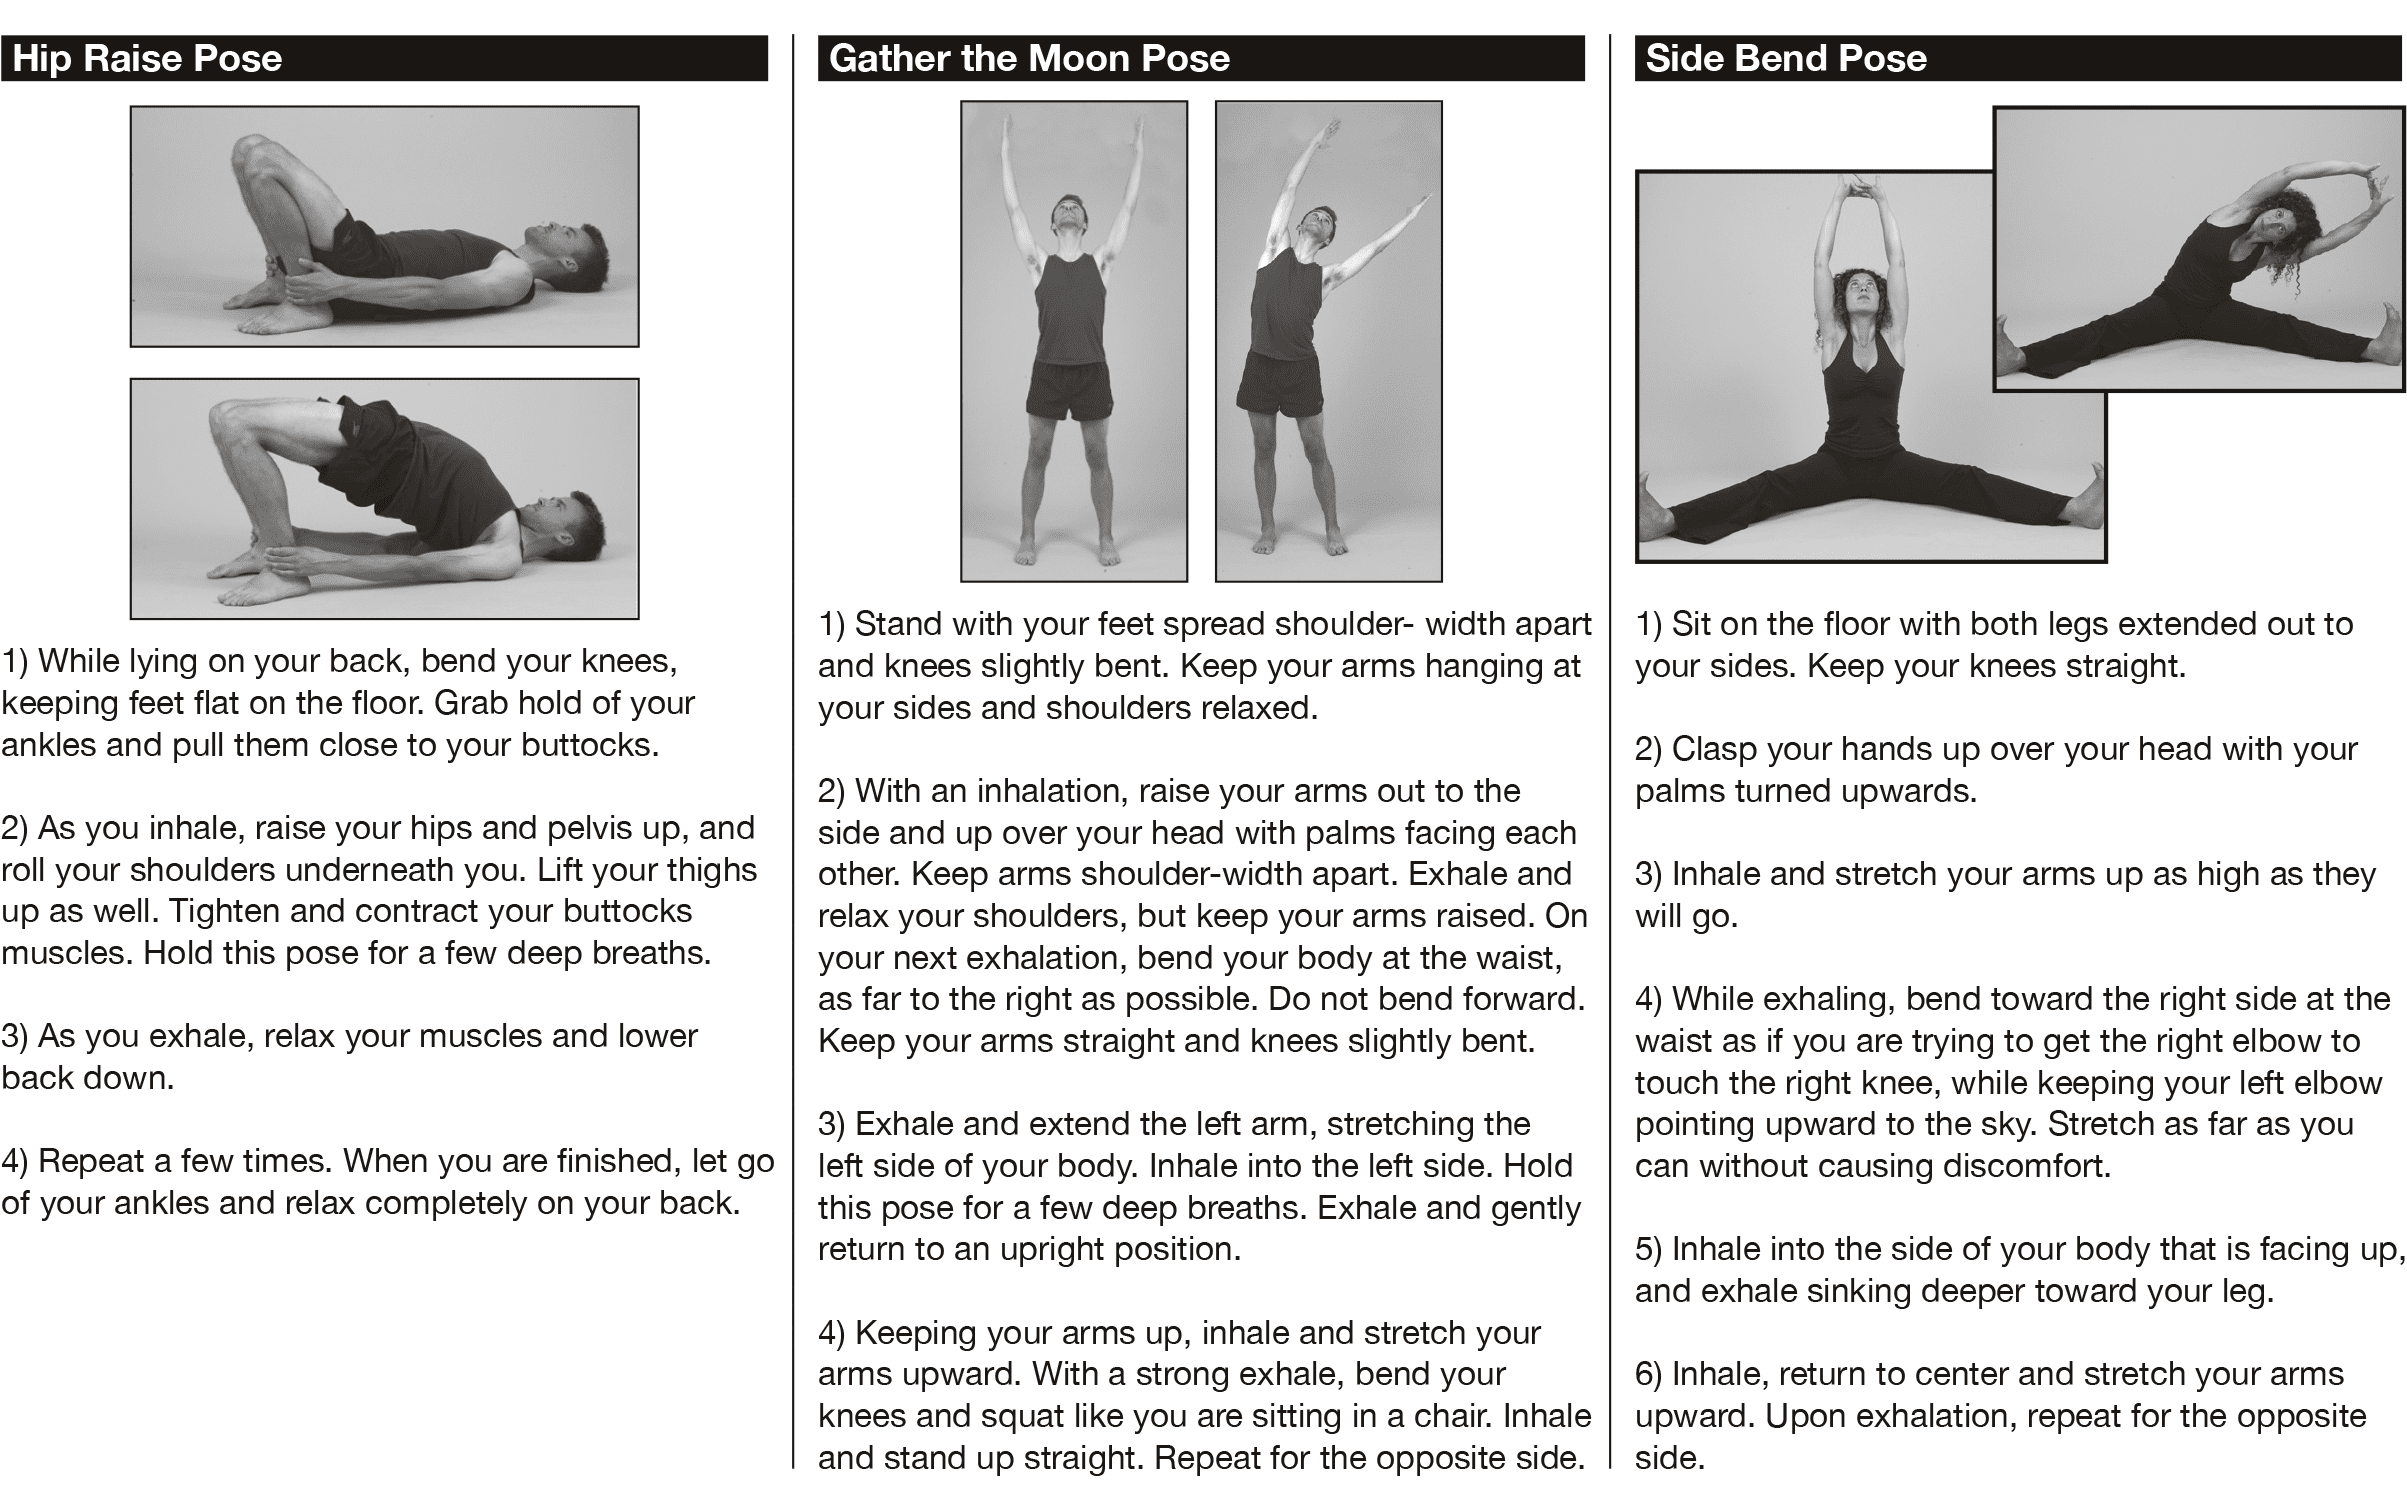 Photos and instructions for hip raise pose, gather the moon pose, and side bend pose